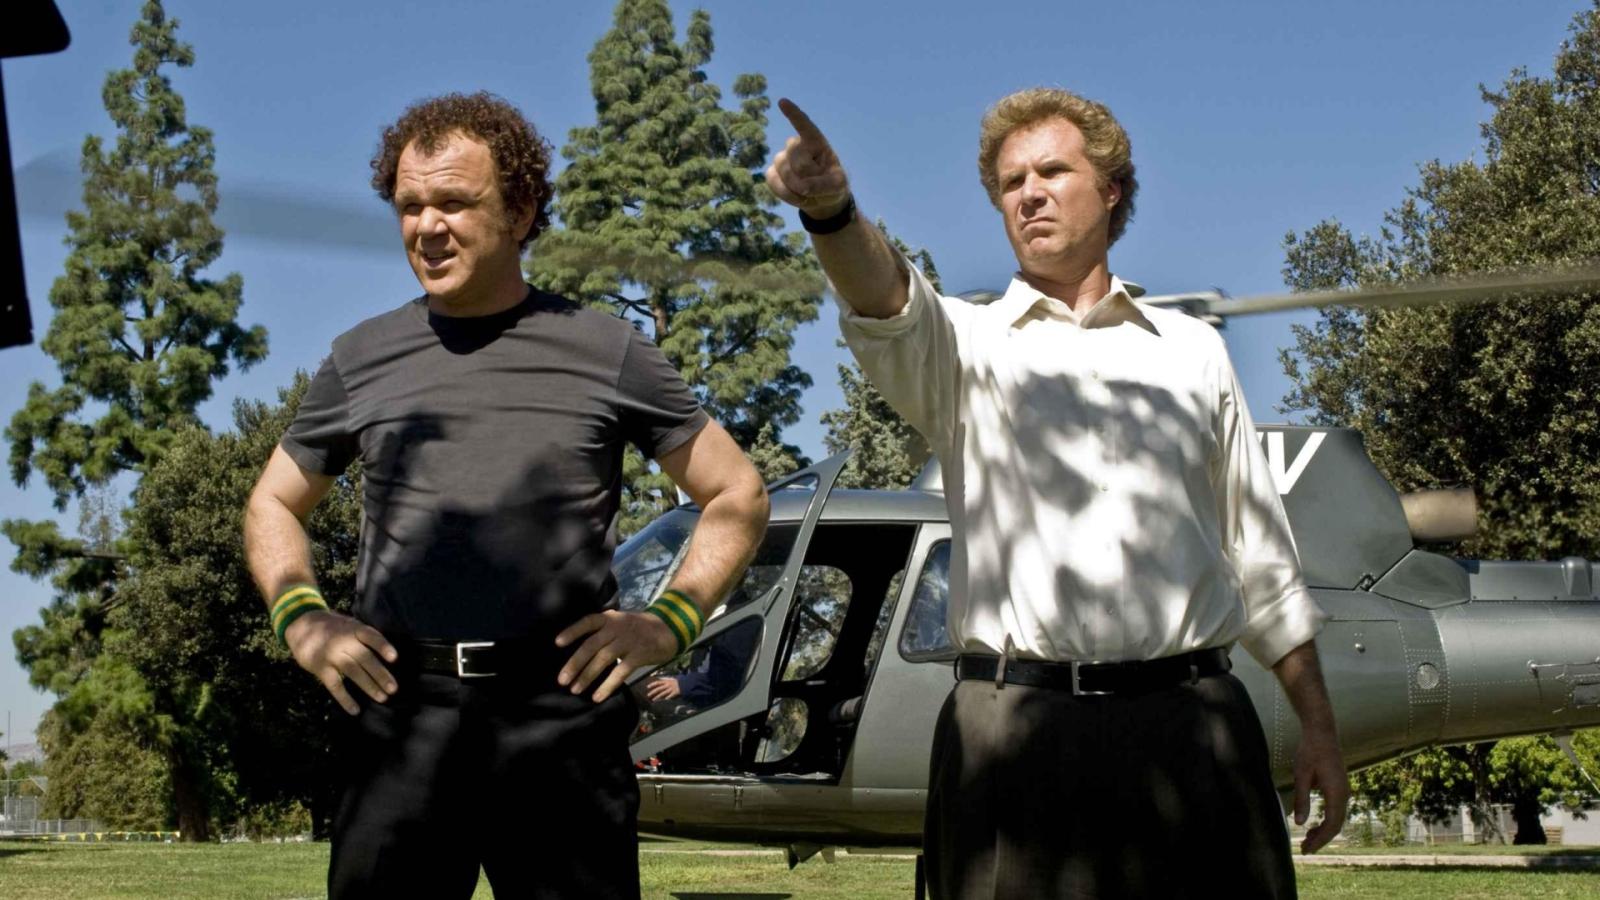 Will Ferrell's 10 Best Movies, as Rated by Rotten Tomatoes - Figure 7